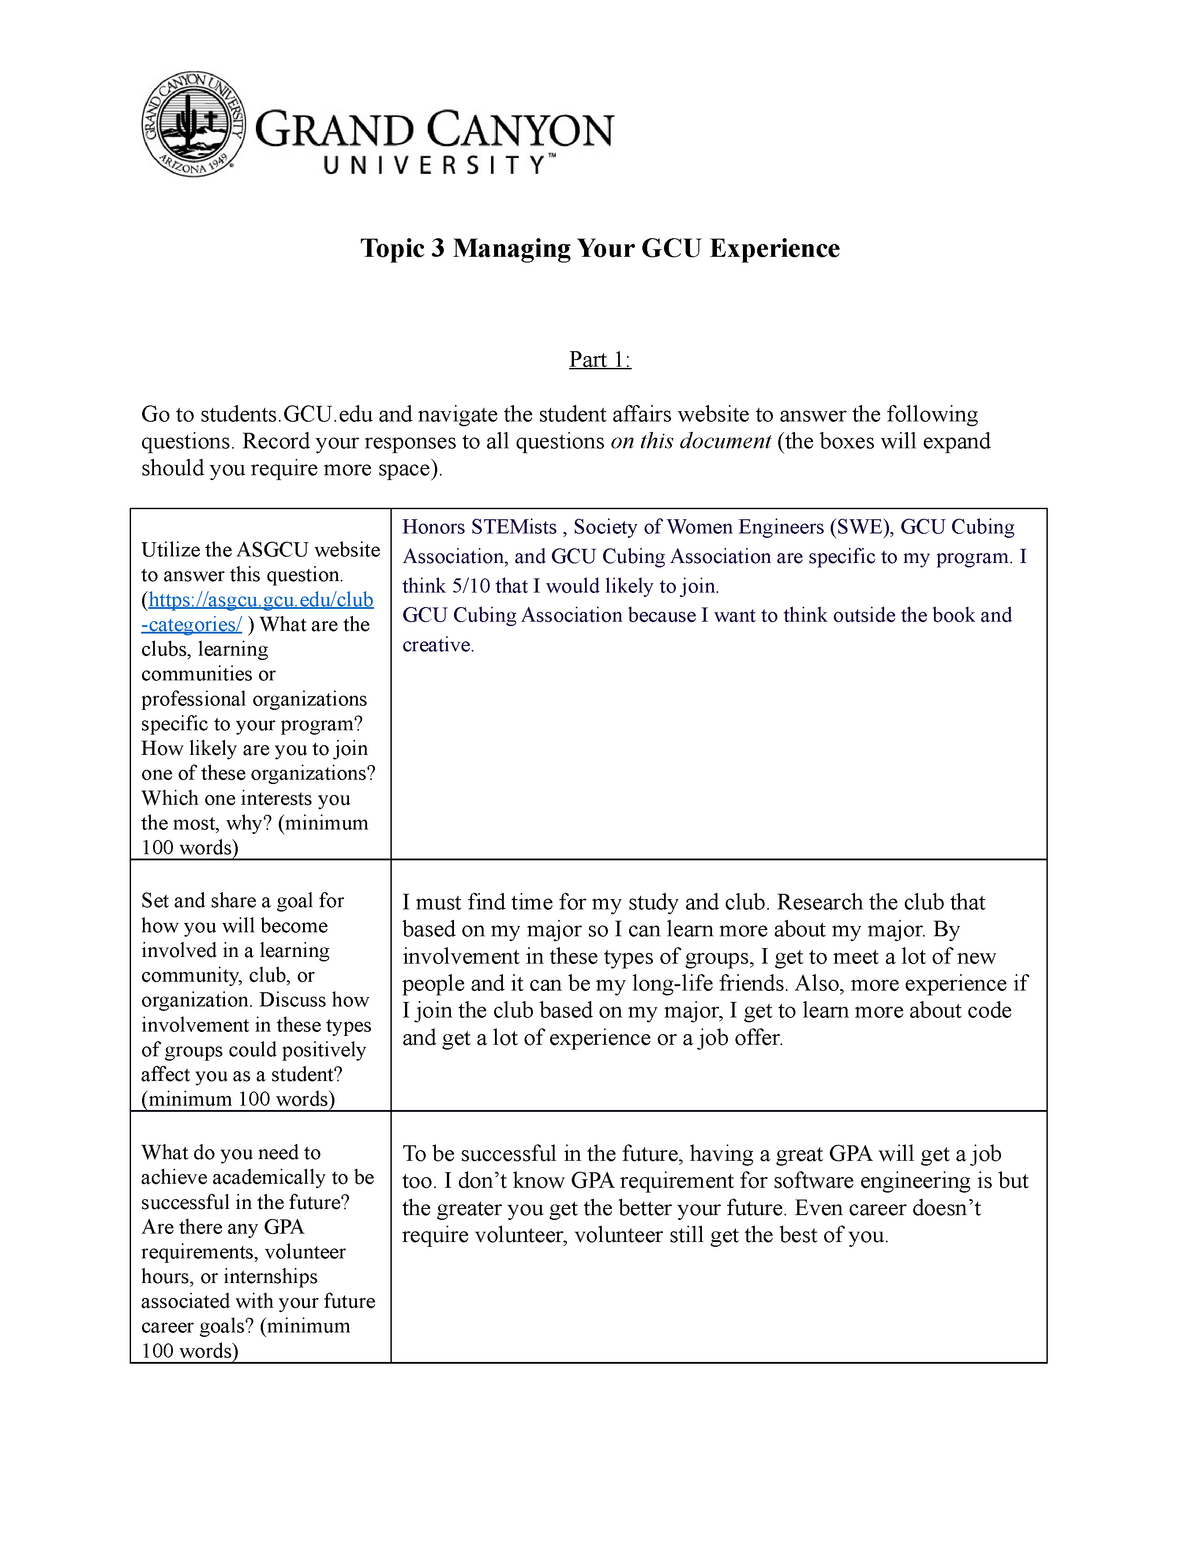 unv103-t3-your-gcu-experience-to-topic-3-managing-your-gcu-experience